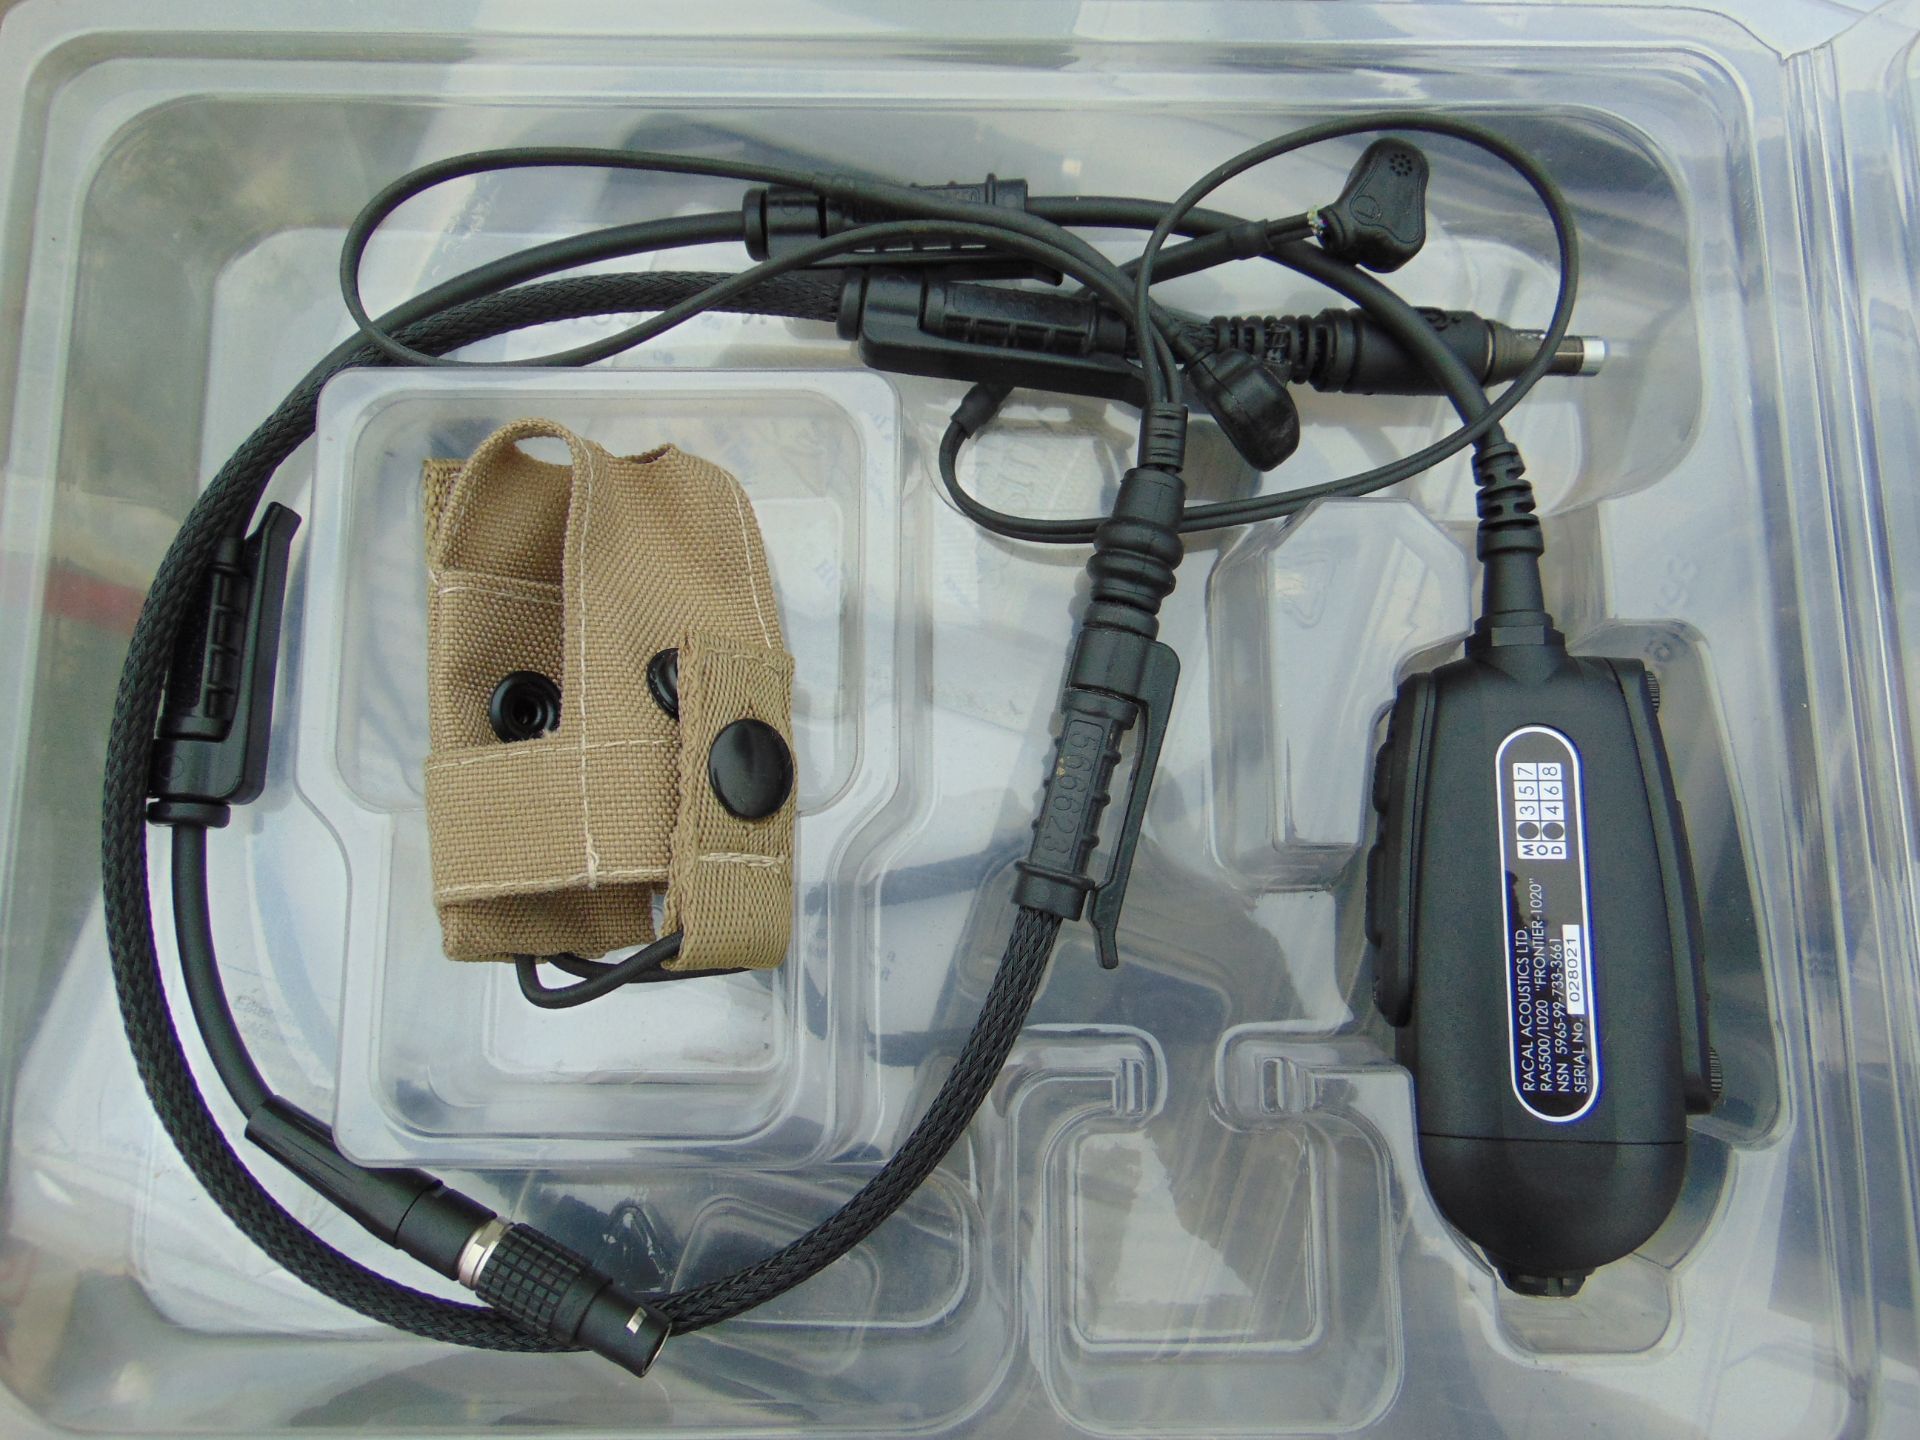 5x Clansman Racal Frontier Headsets / Communication System - Image 3 of 5